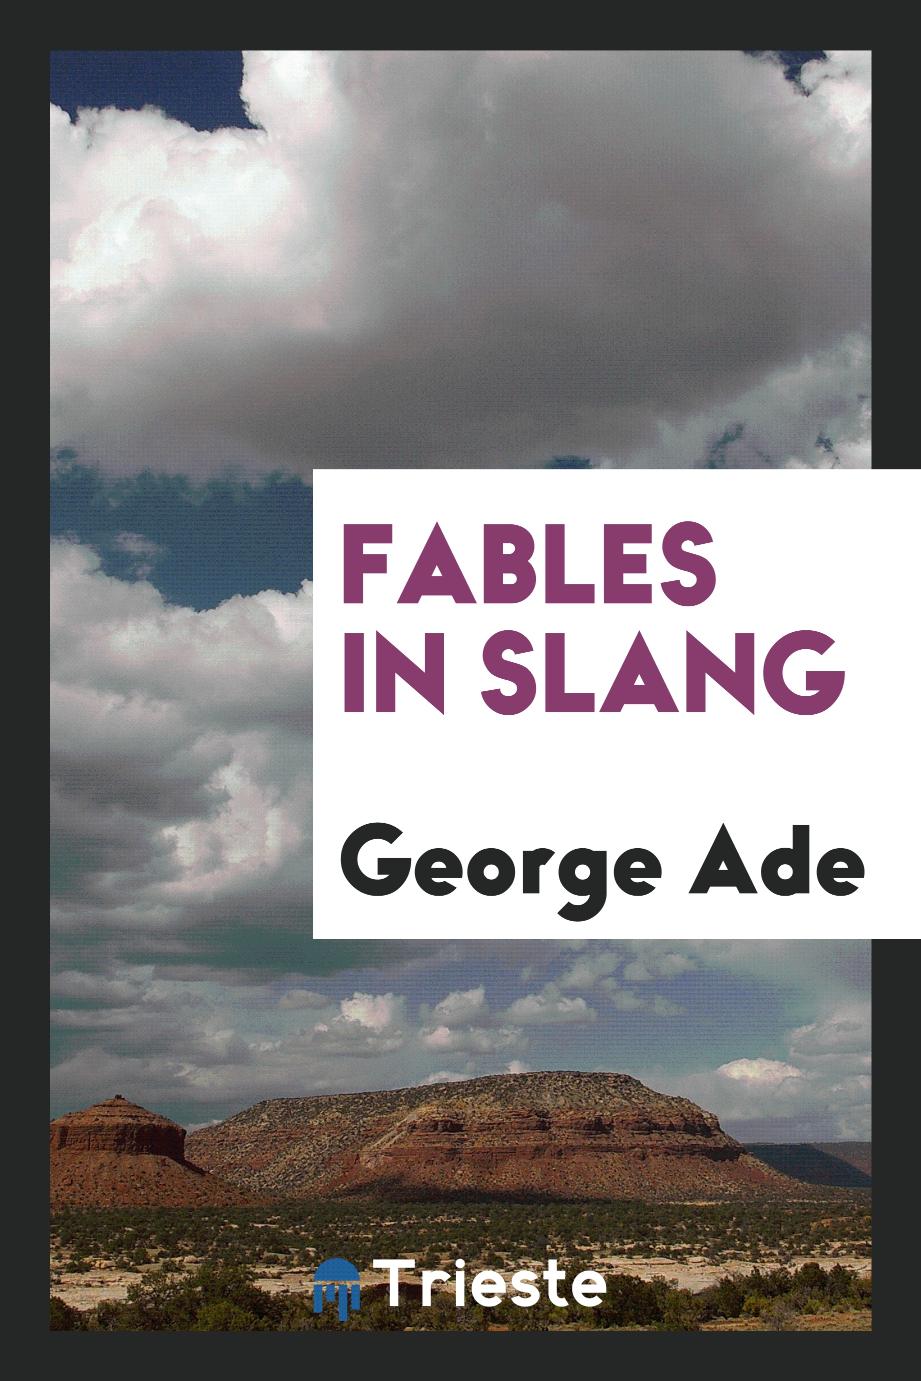 George Ade - Fables in slang